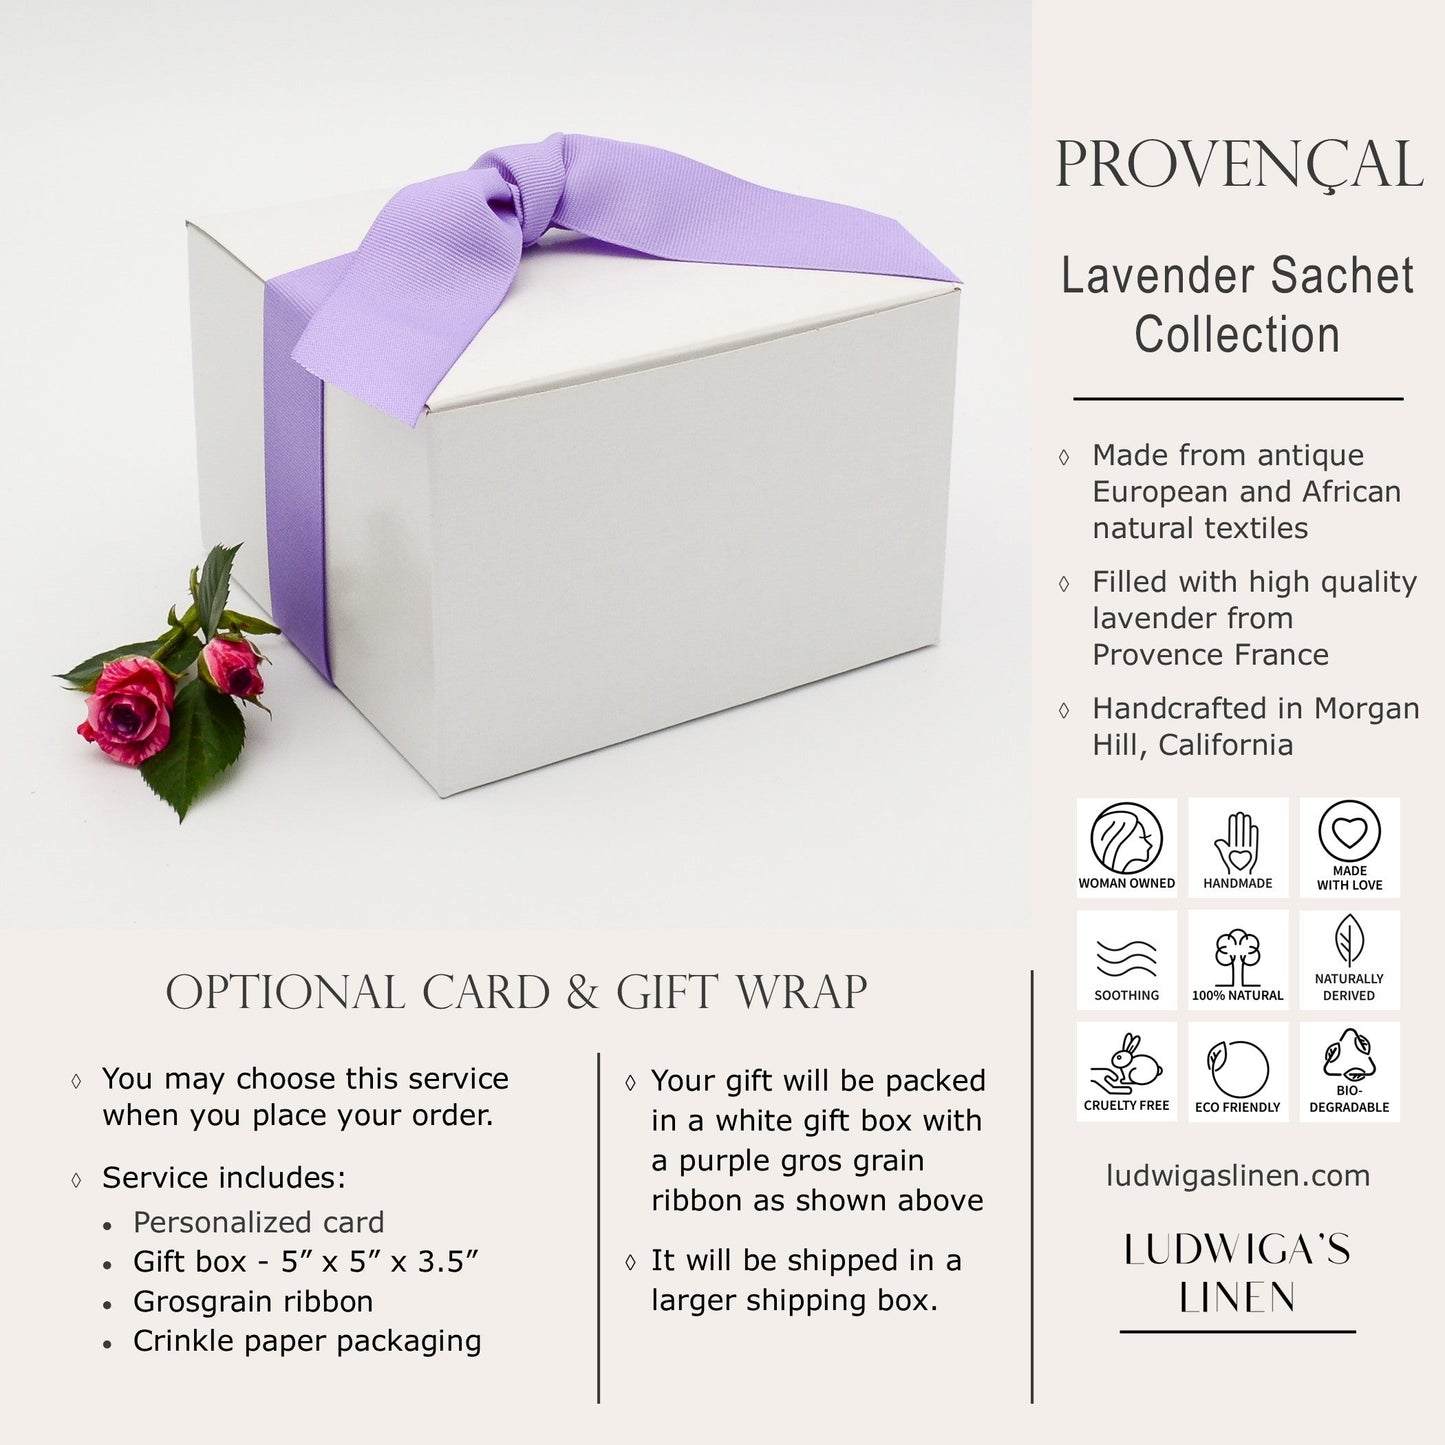 Optional gift box with purple gros grain ribbon, information about Ludwiga's Linen Provençal sachet collection and shipping information